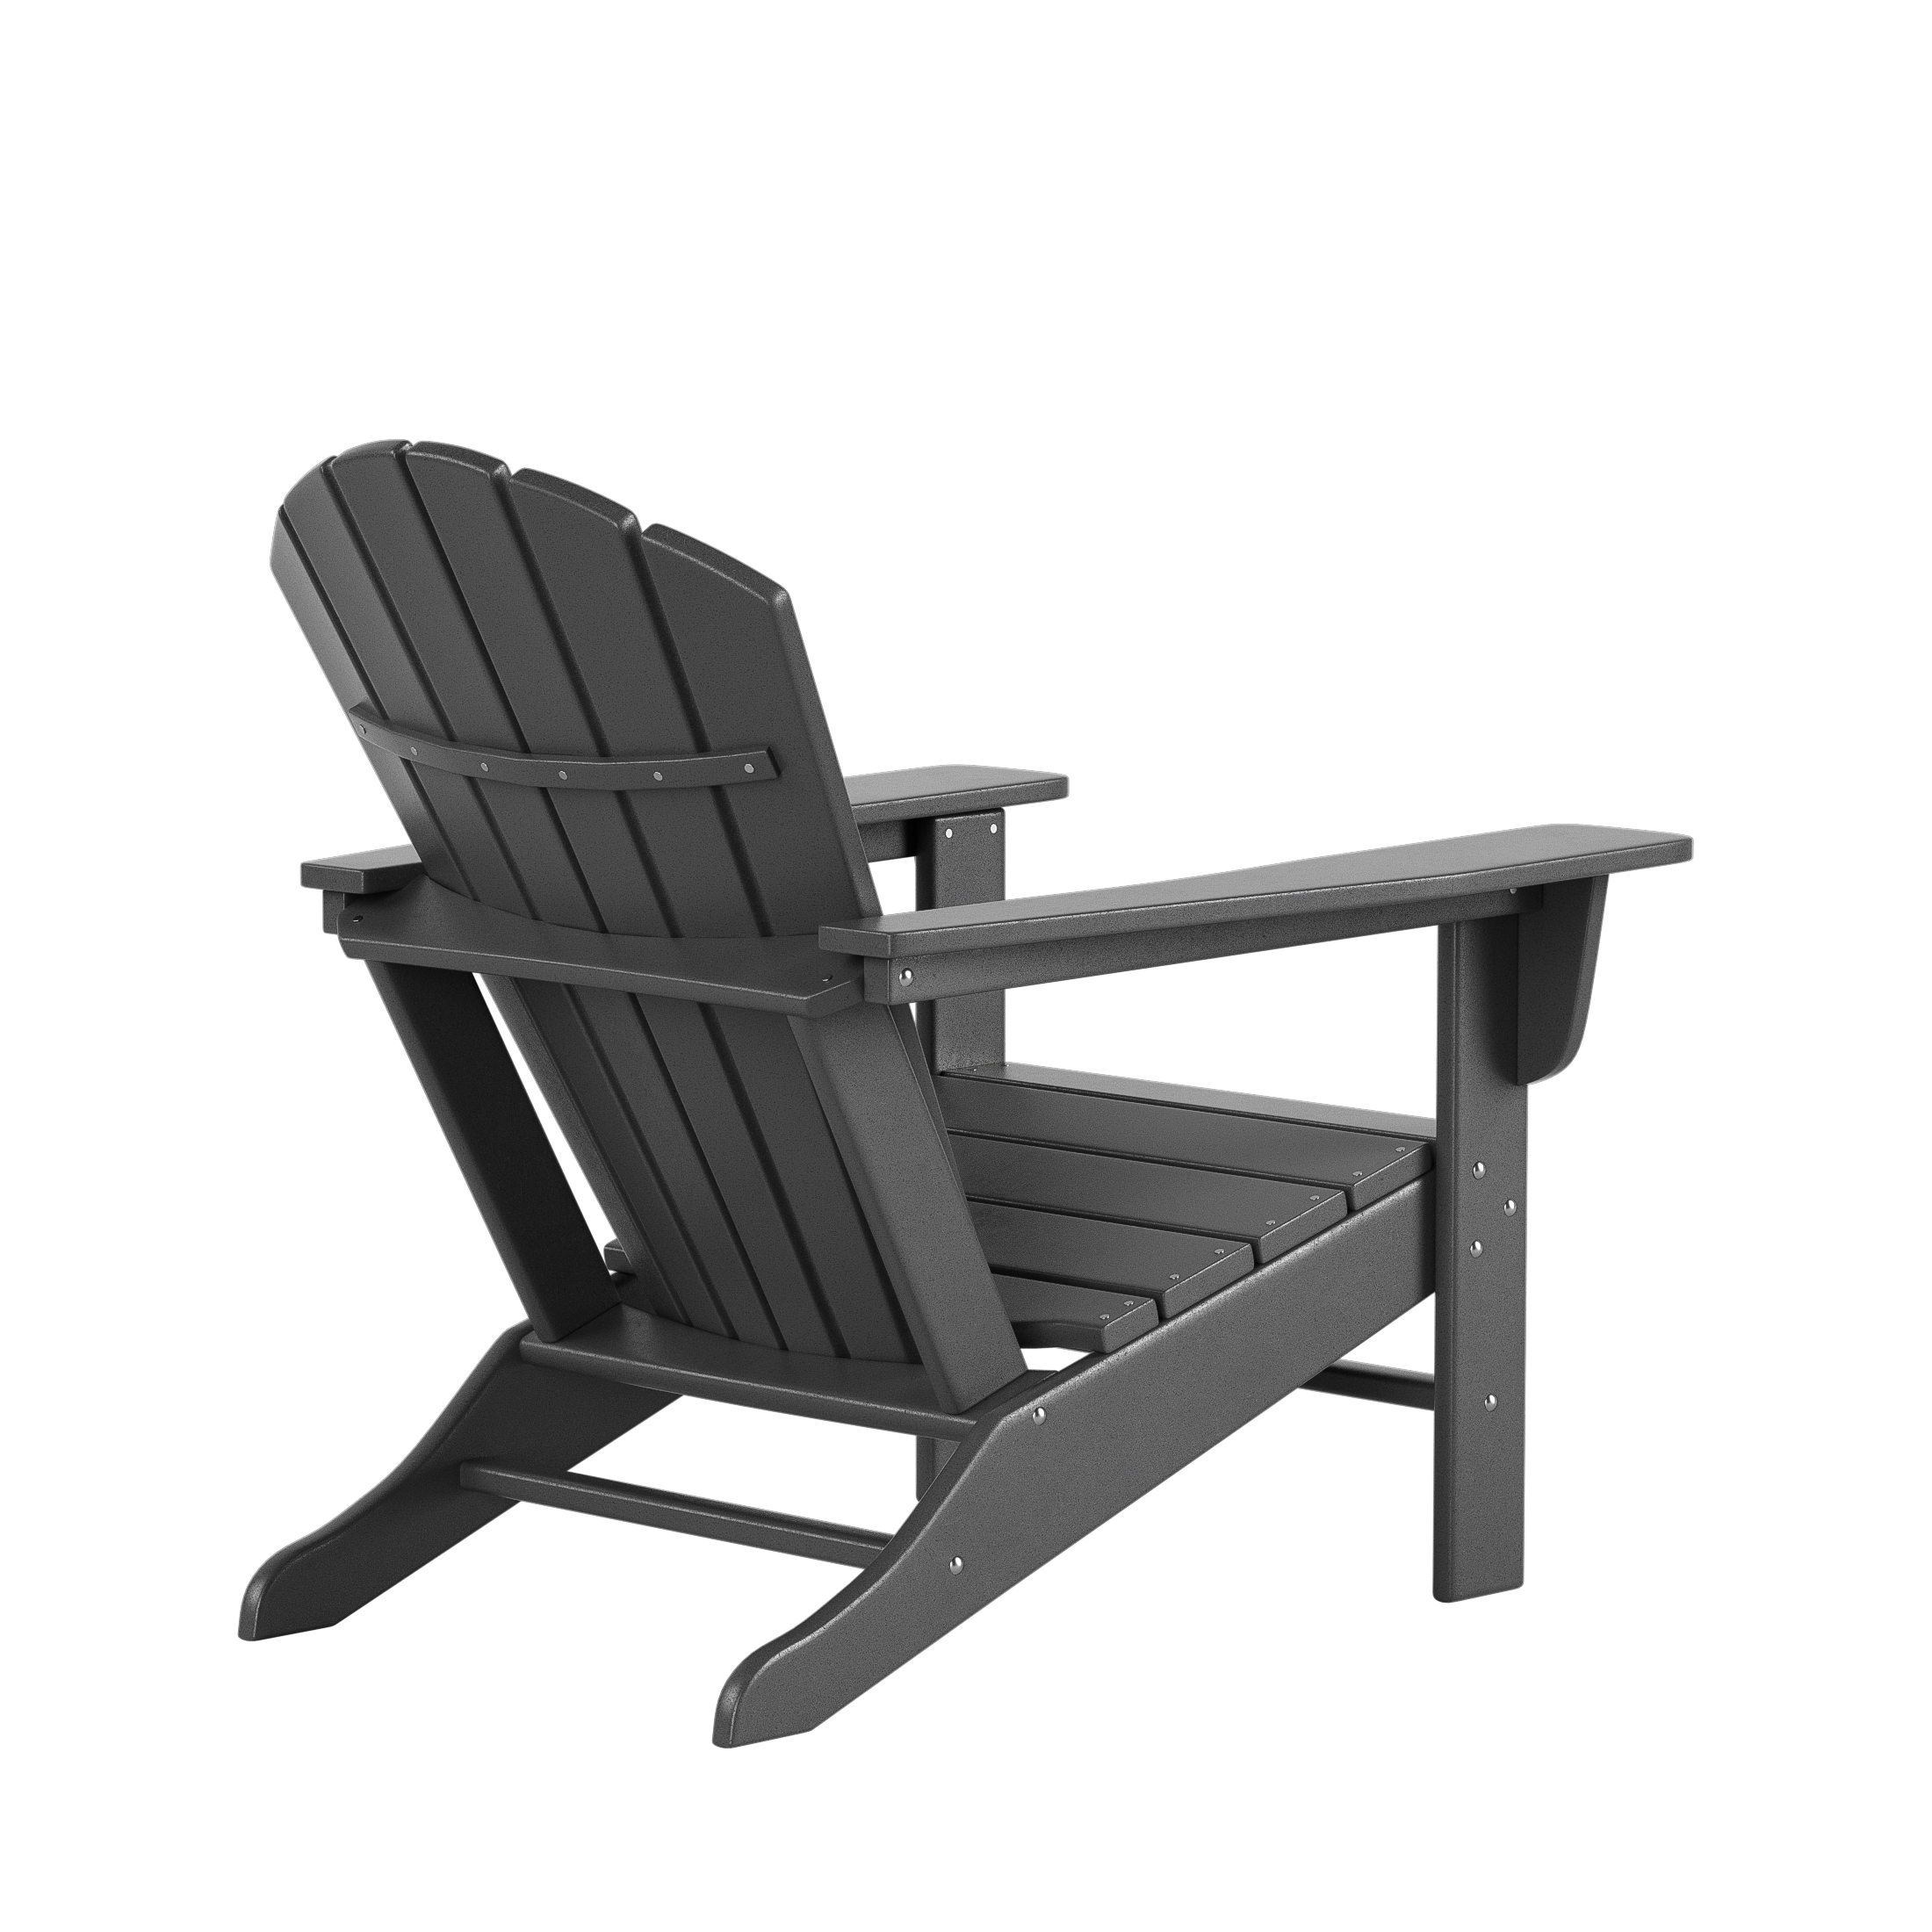 Westin Outdoor with Side Table HDPE Plastic Adirondack Chair - Gray (Set of 2) - image 4 of 5